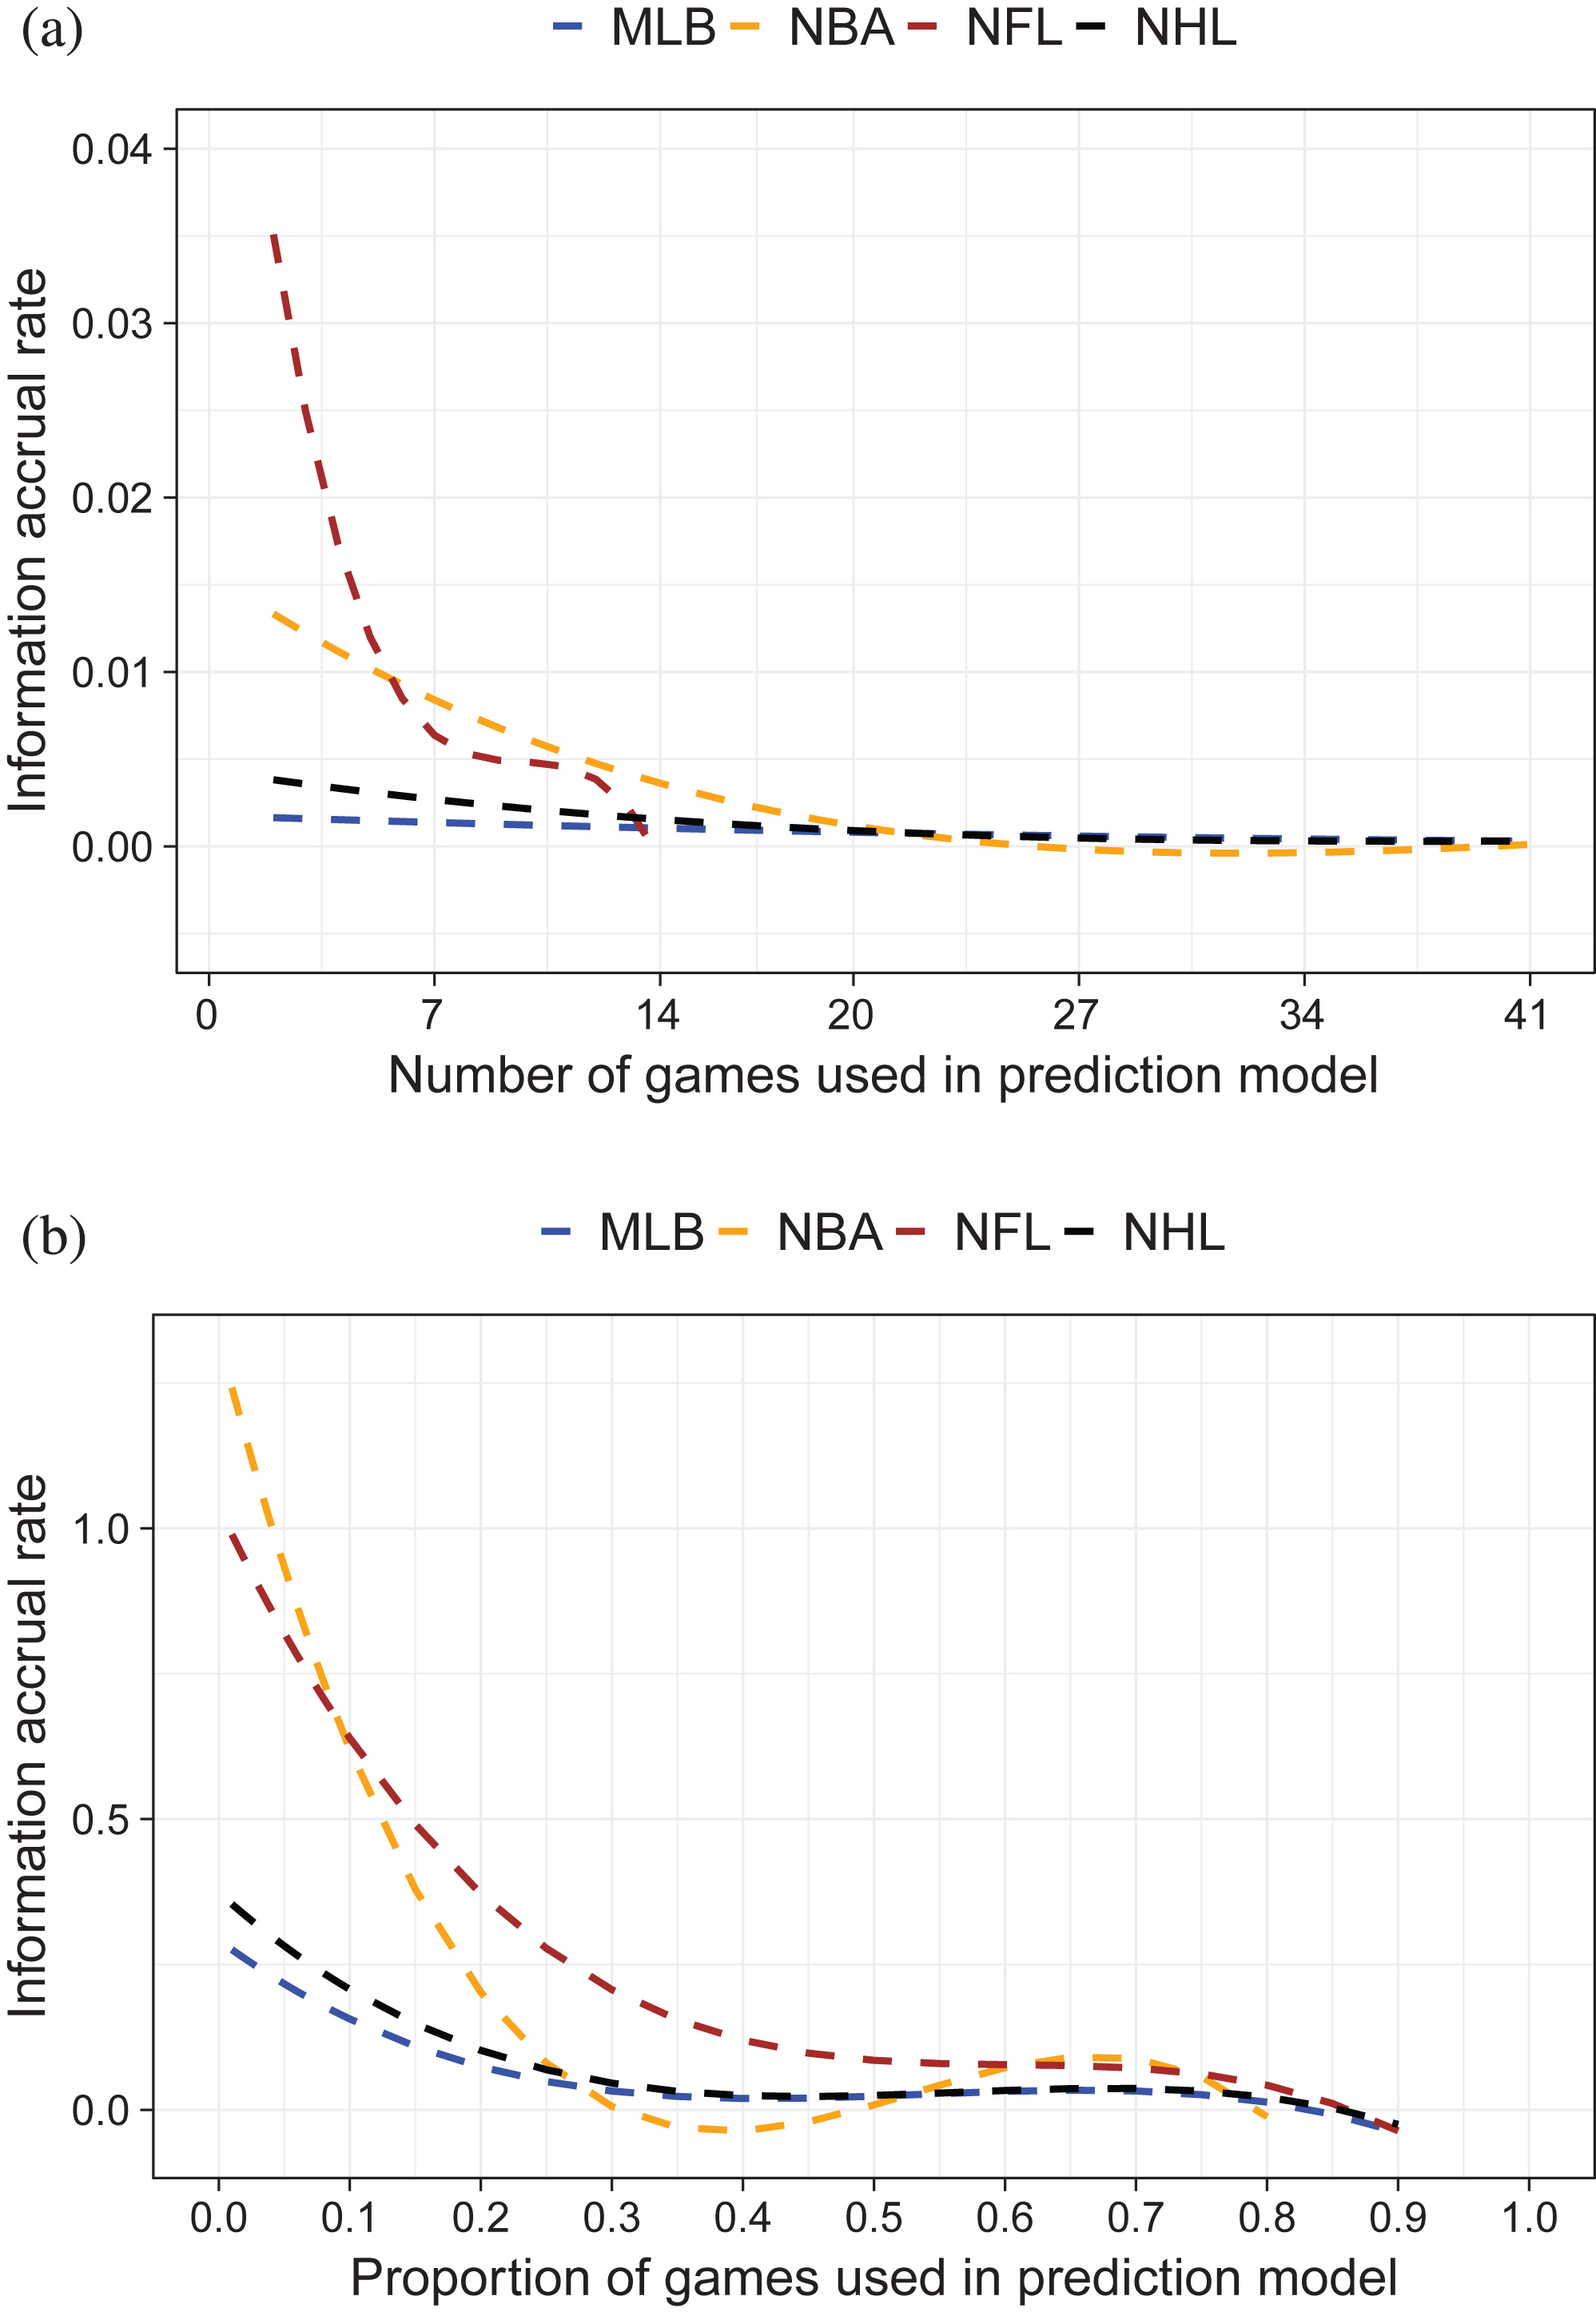 Information accrual rate (first derivative of IMOV curve) for four major U.S. sports leagues. (a) Information accrual rate by number of games used in prediction model. Number of games truncated at 41 for readability. (b) Information accrual rate by proportion of season games used in prediction model.